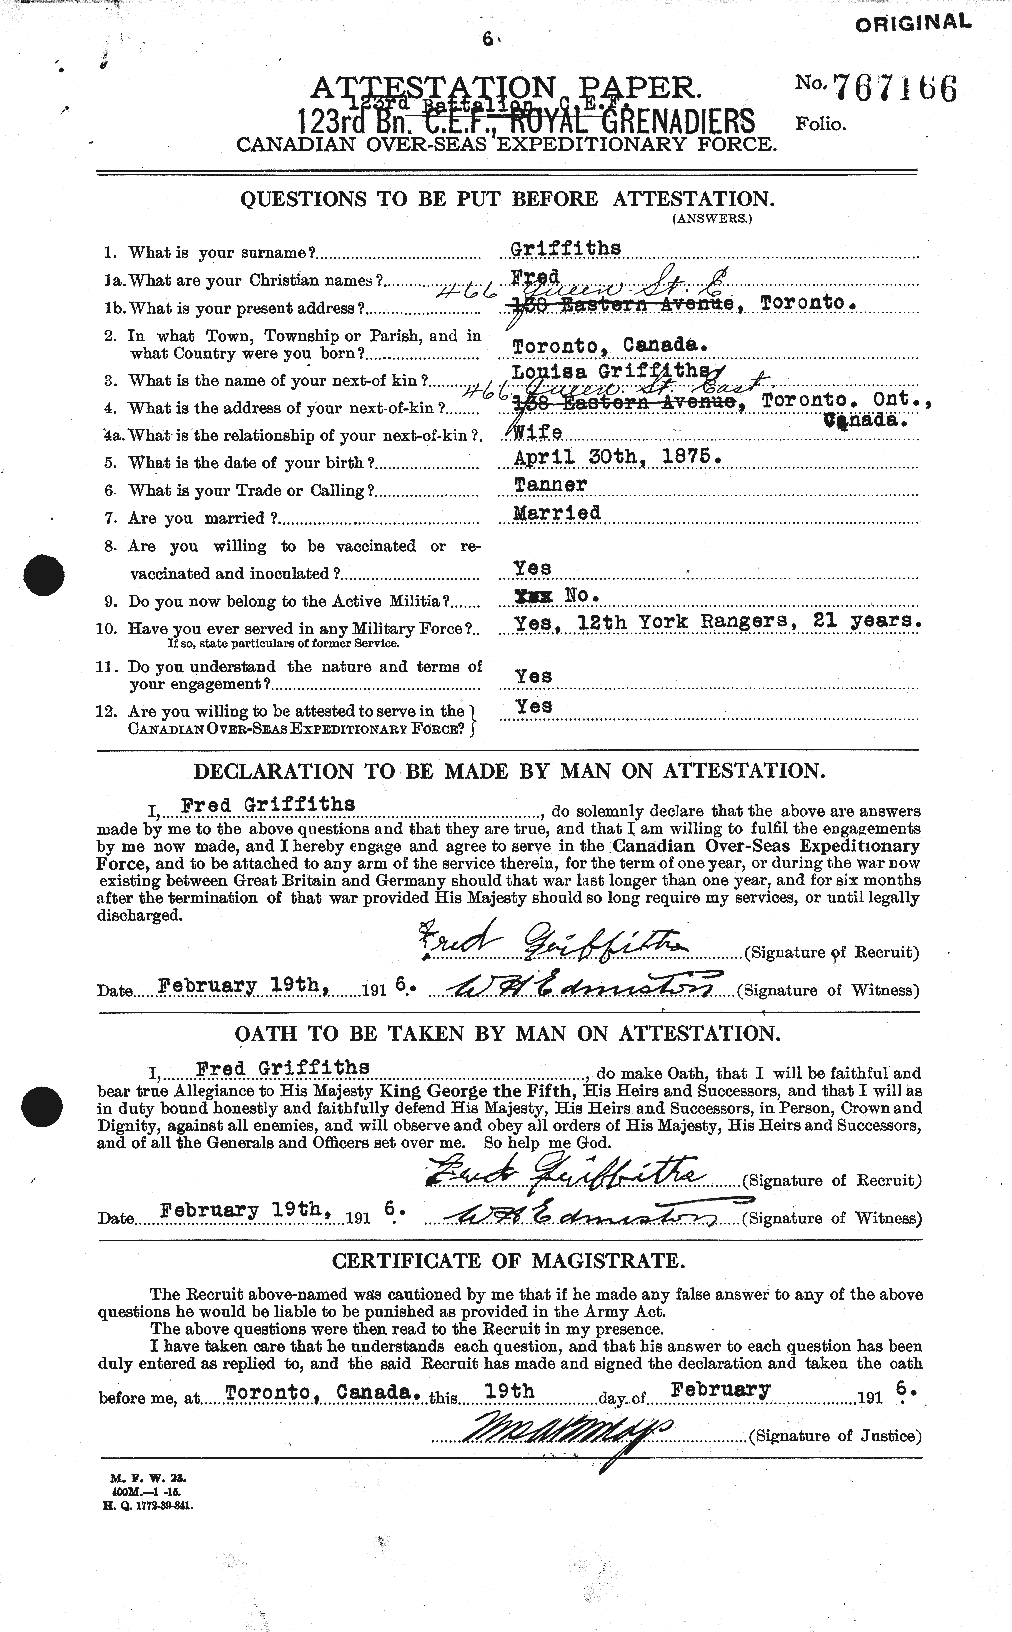 Personnel Records of the First World War - CEF 366673a